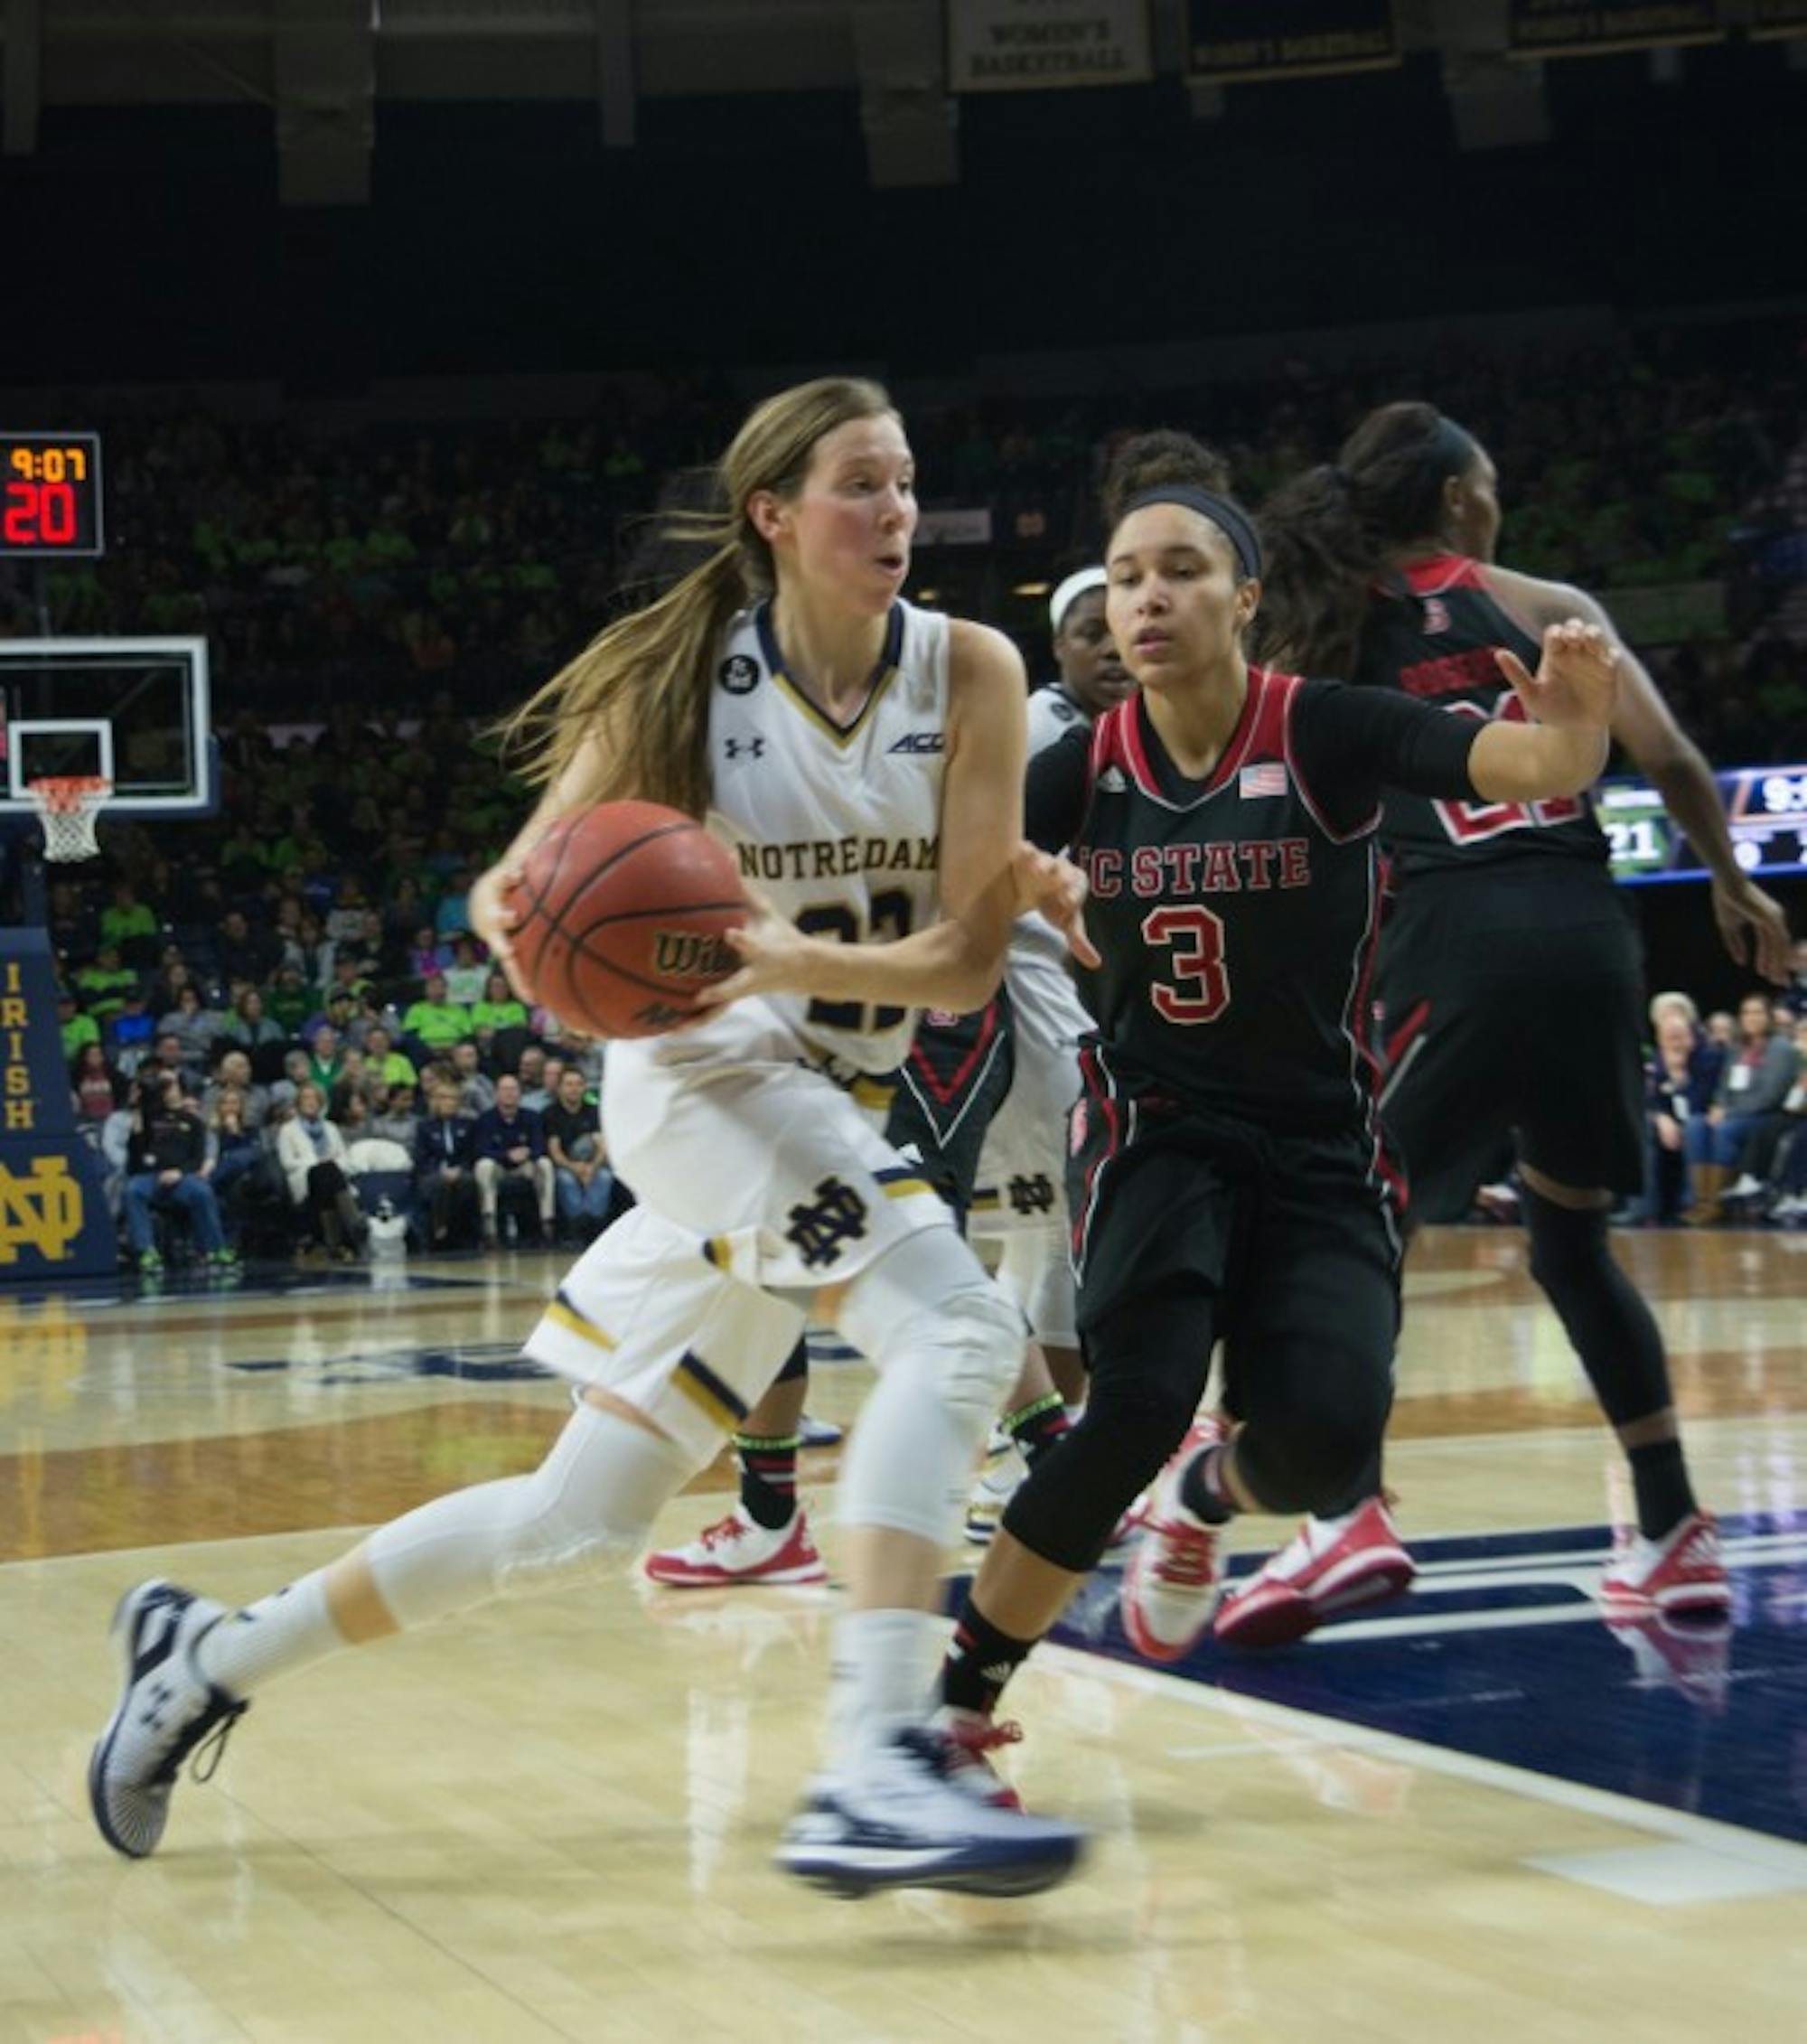 CAITLYN JORDAN | The Observer Graduate student guard Madison Cable drives to the basket during Notre Dame’s 82-46 win over NC State on Thursday at Purcell Pavilion.